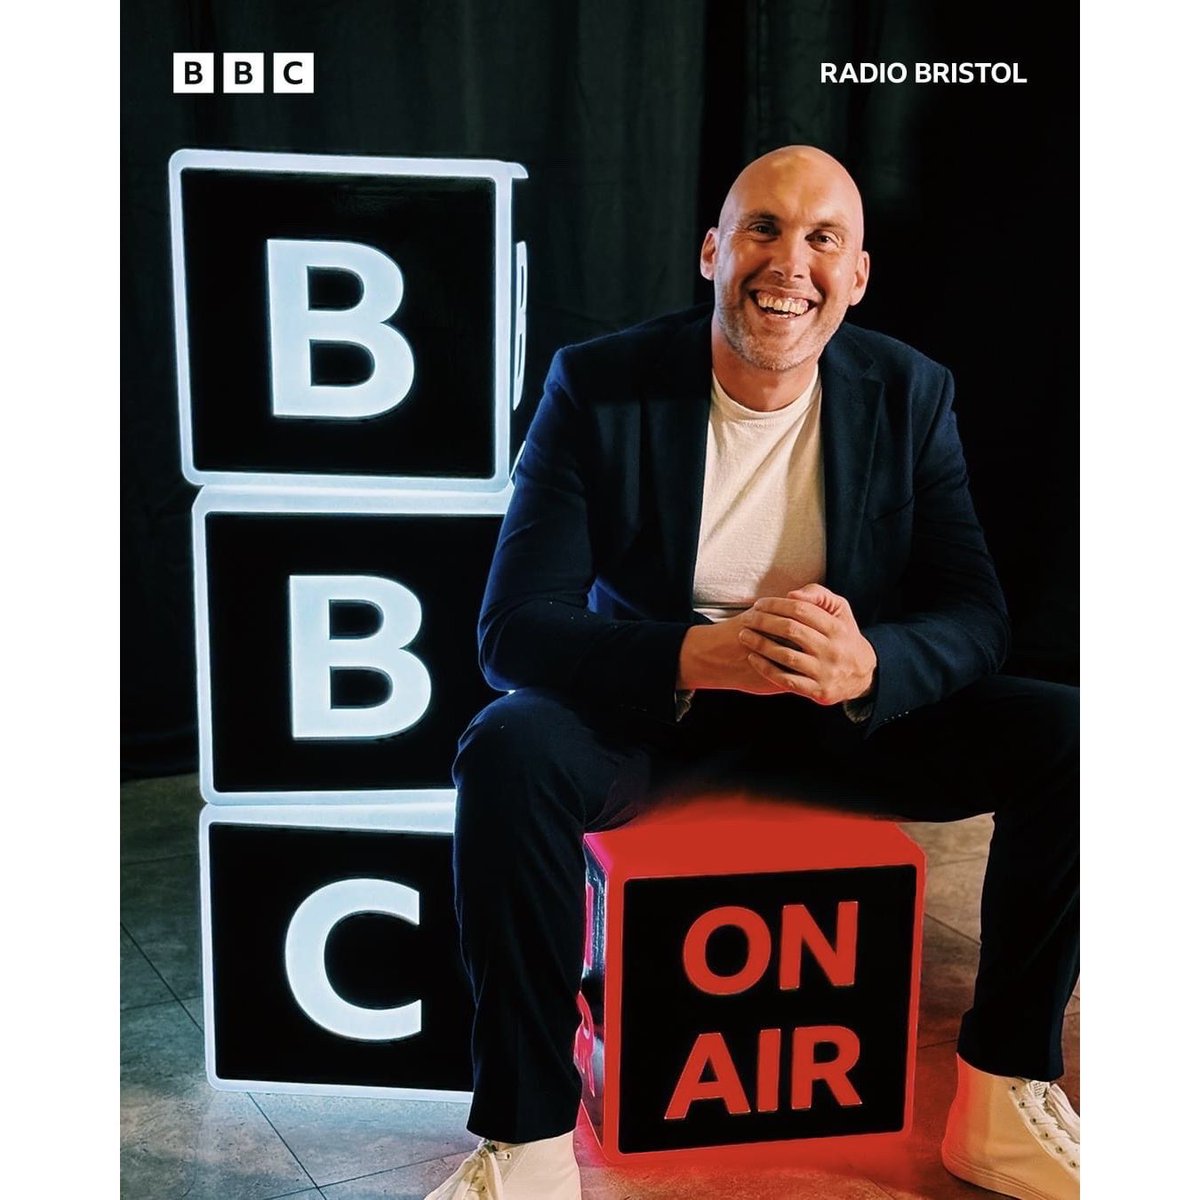 Tomorrow BBC Radio Bristol Presenter Joe Sims switches on our Magical Clifton Christmas Lights! ✨🎄 Get into the Festive Spirit with: 🌟Community Carol Singing from 6pm ✨ 🌟Free Samples of Mulled Sangria and Hot Chocolates curtesy of @bar44bristol 🍷 And more!